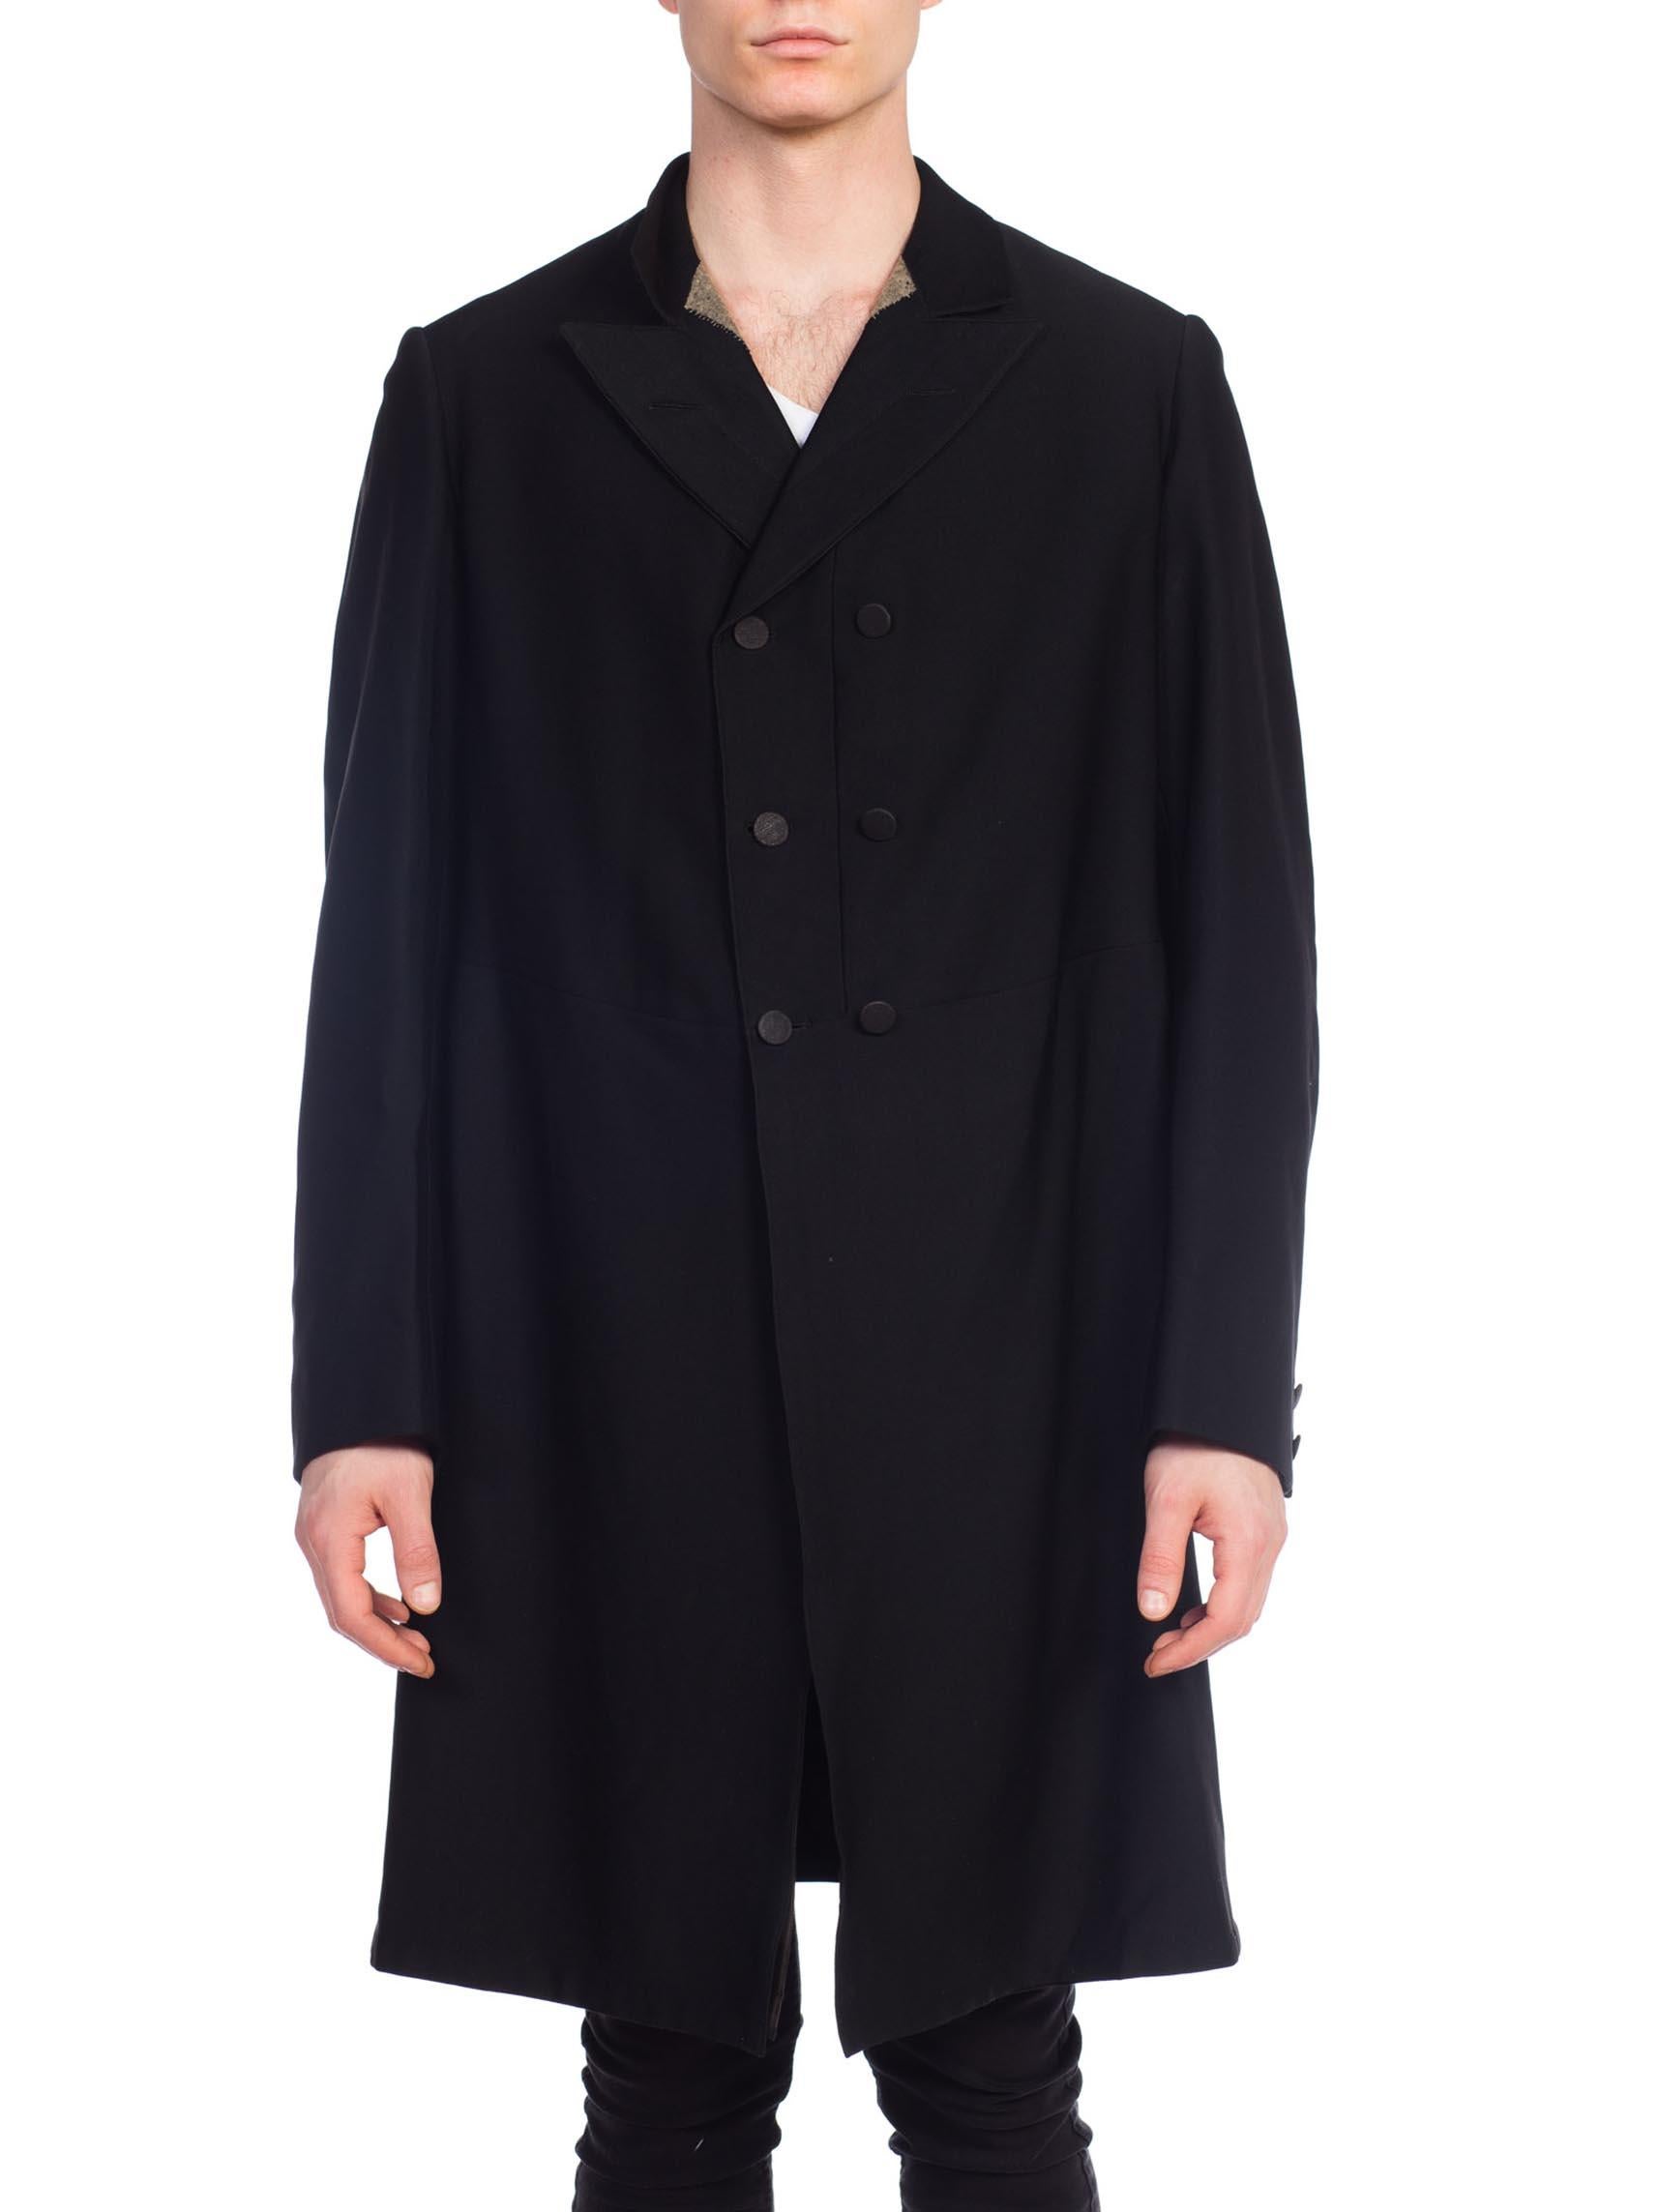 Fantastic condition aside from missing silk from lapels. VERY rare XL size Victorian Black Wool Men's 1890S Double Breasted Frock Coat Large 